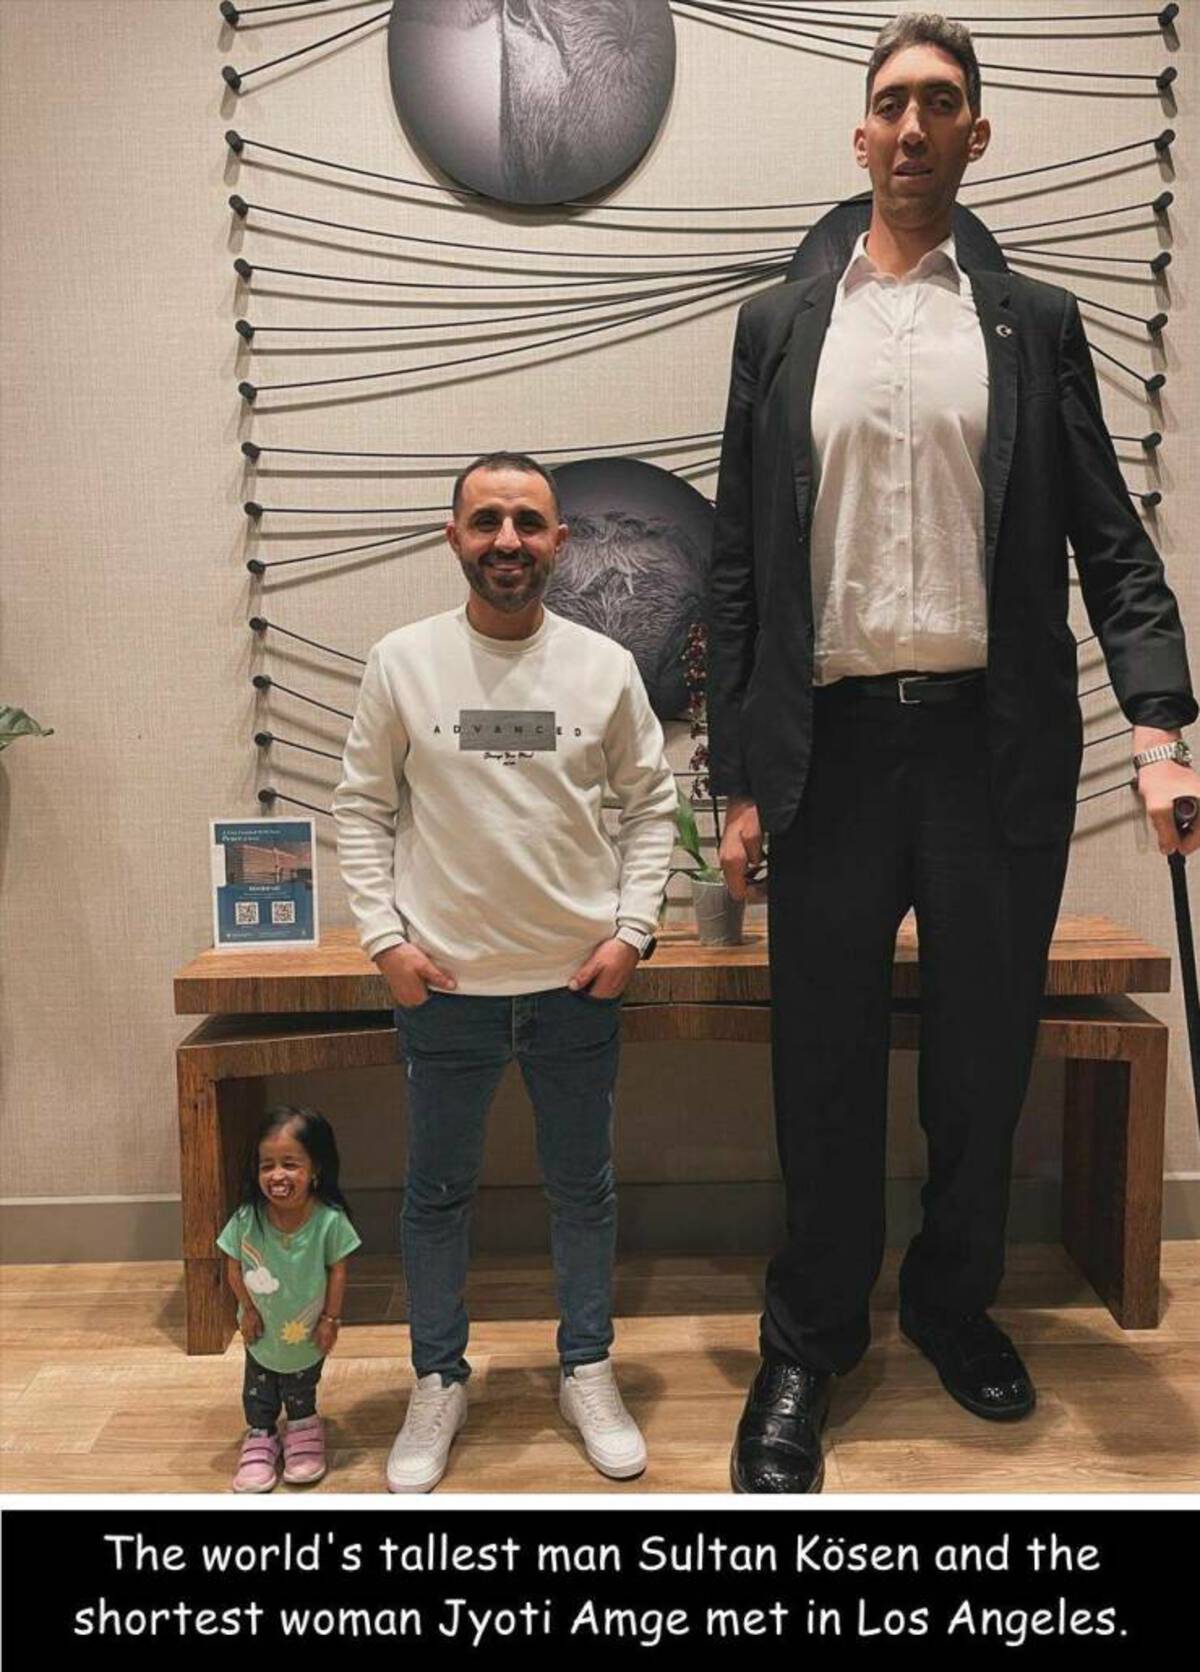 standing - Advanced The world's tallest man Sultan Ksen and the shortest woman Jyoti Amge met in Los Angeles. uring